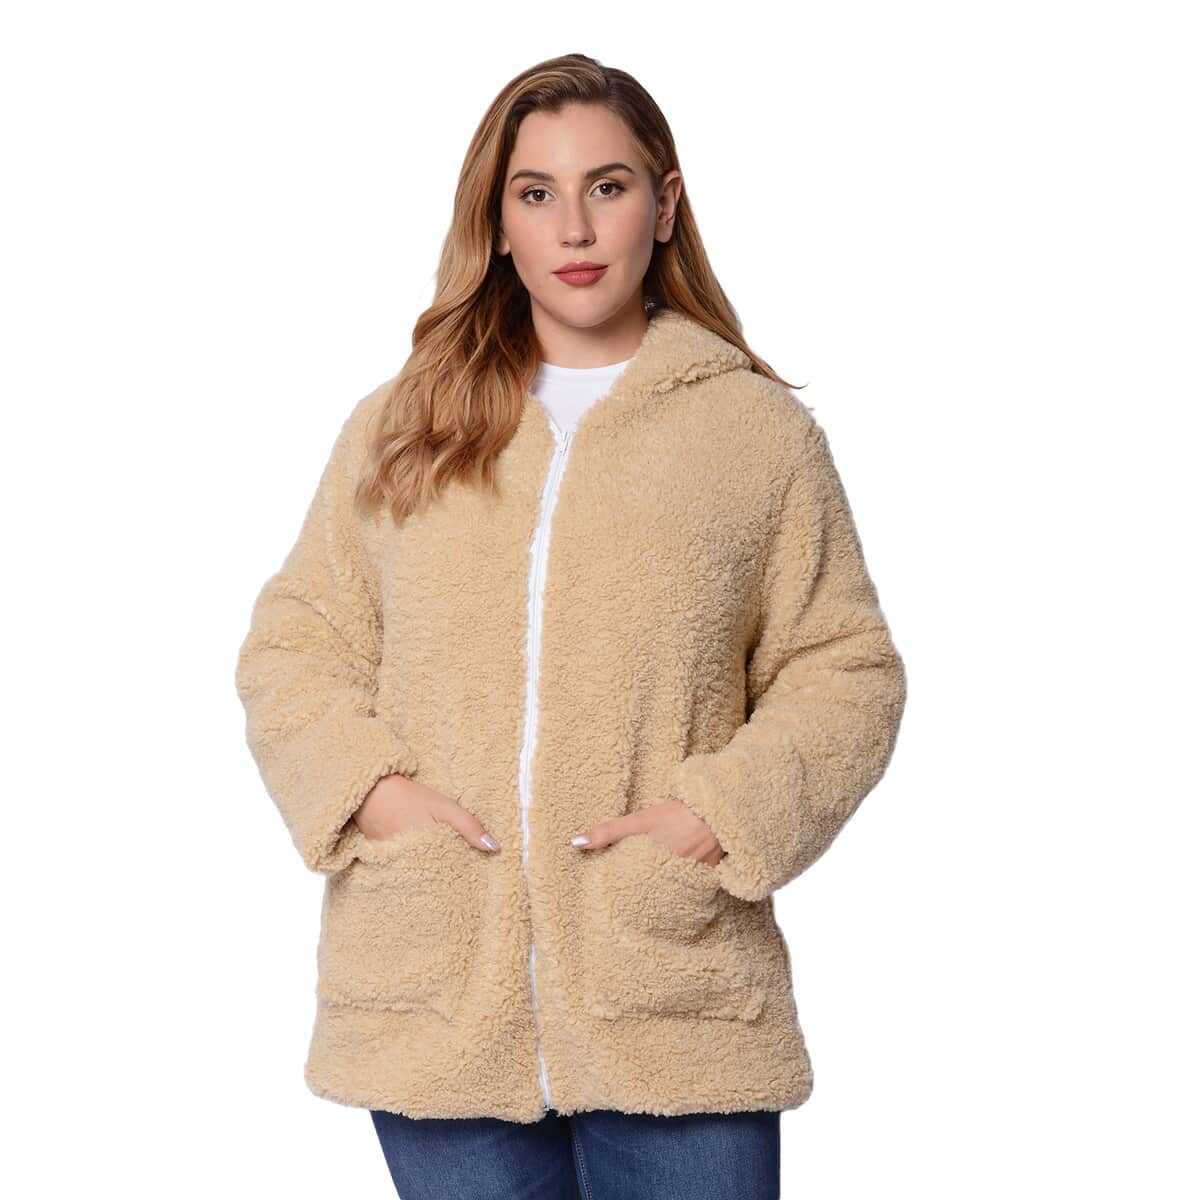 Beige Satin Lined Faux Fur Hooded Jacket with Front Pockets (M, 100% Polyester) image number 0